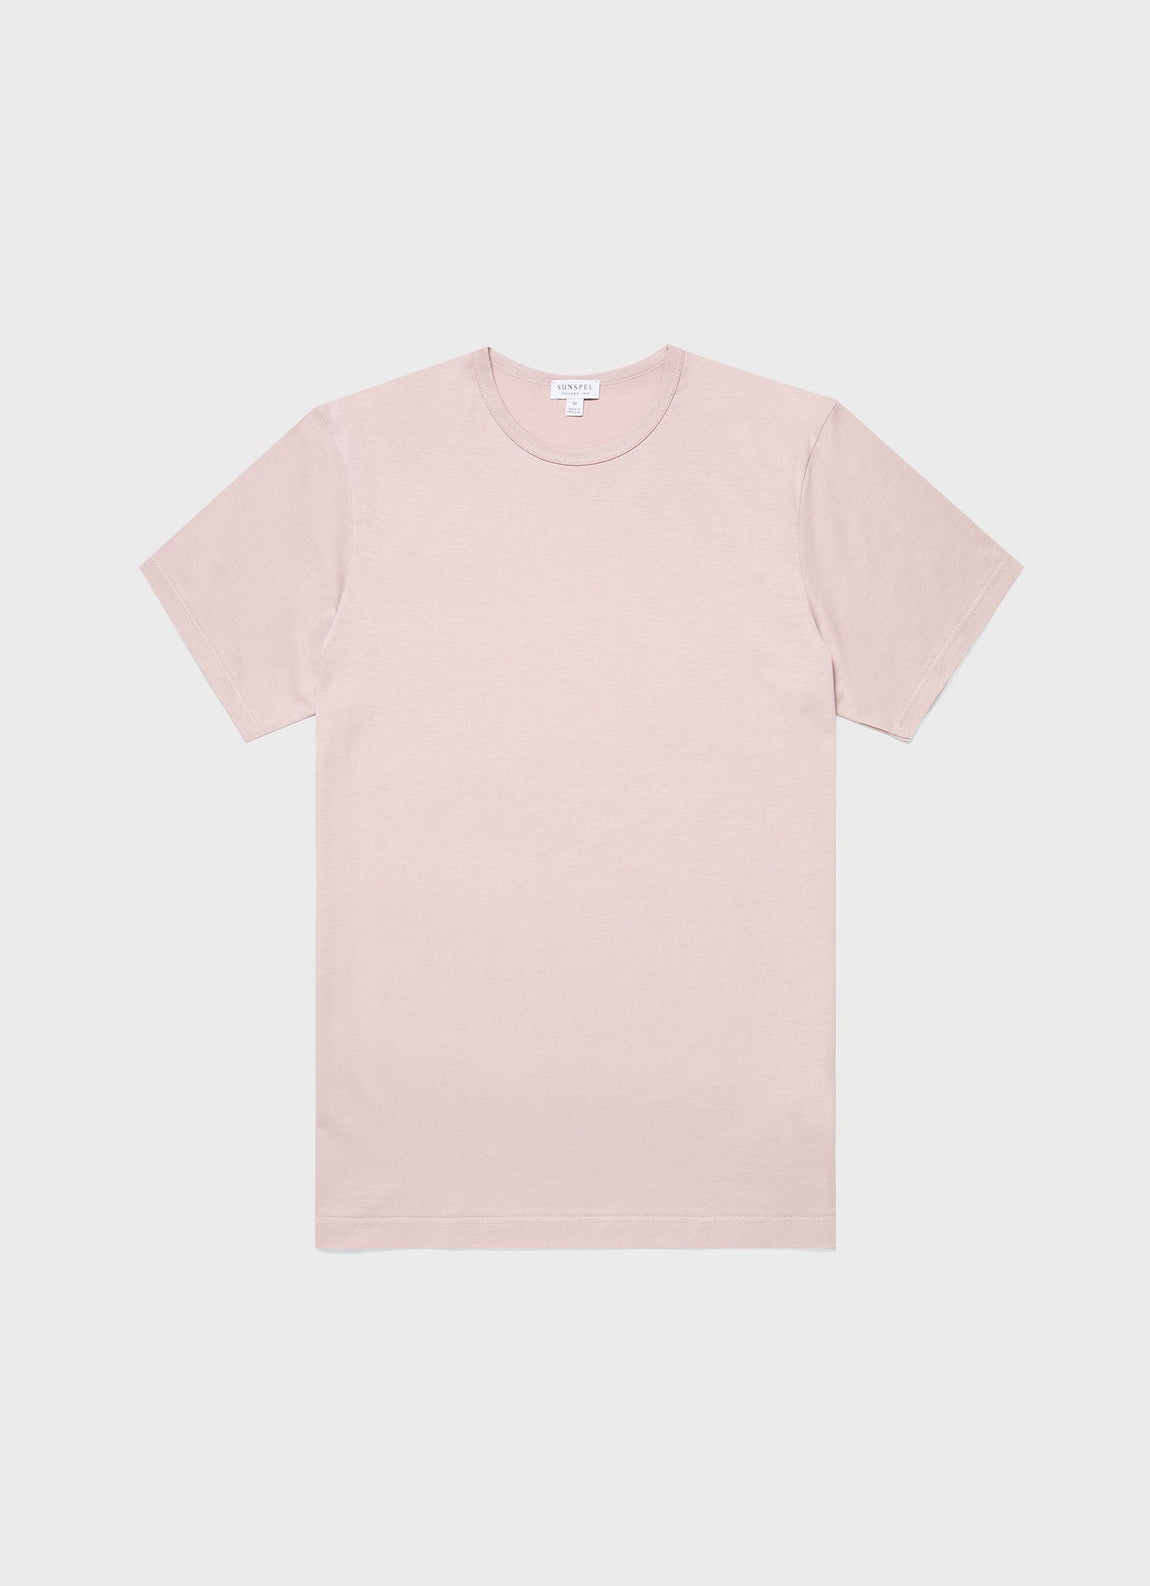 Men's Classic T-shirt in Pale Pink